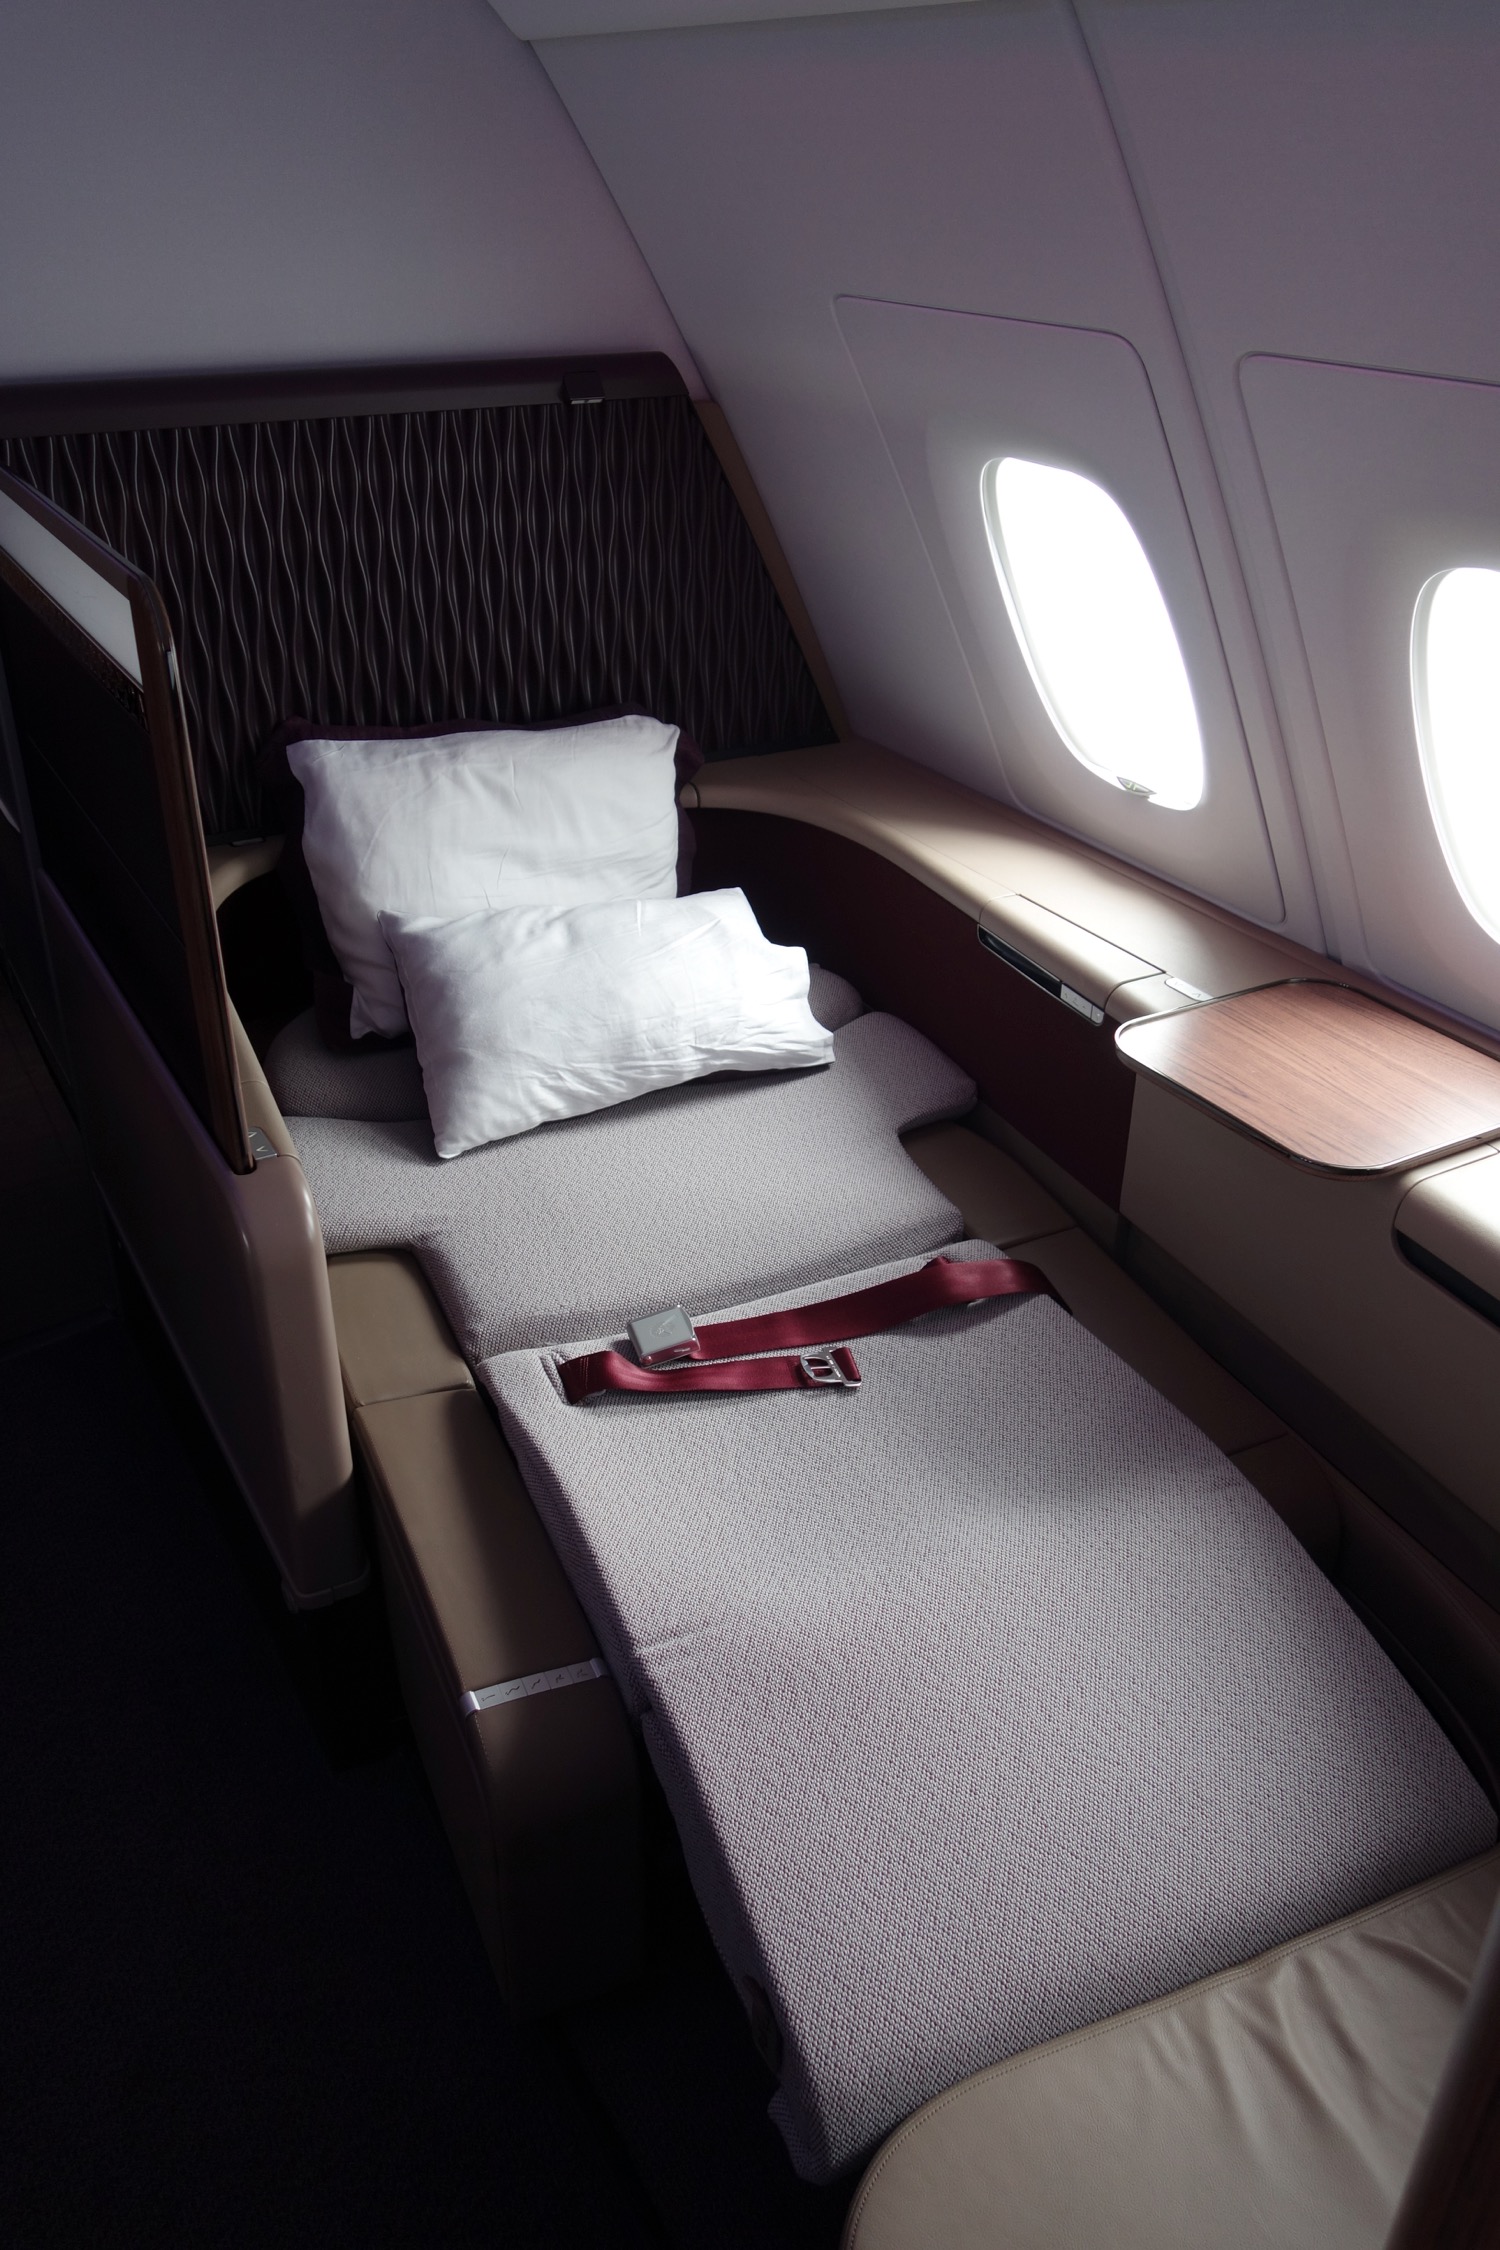 a seat belt and pillows on a bed in an airplane